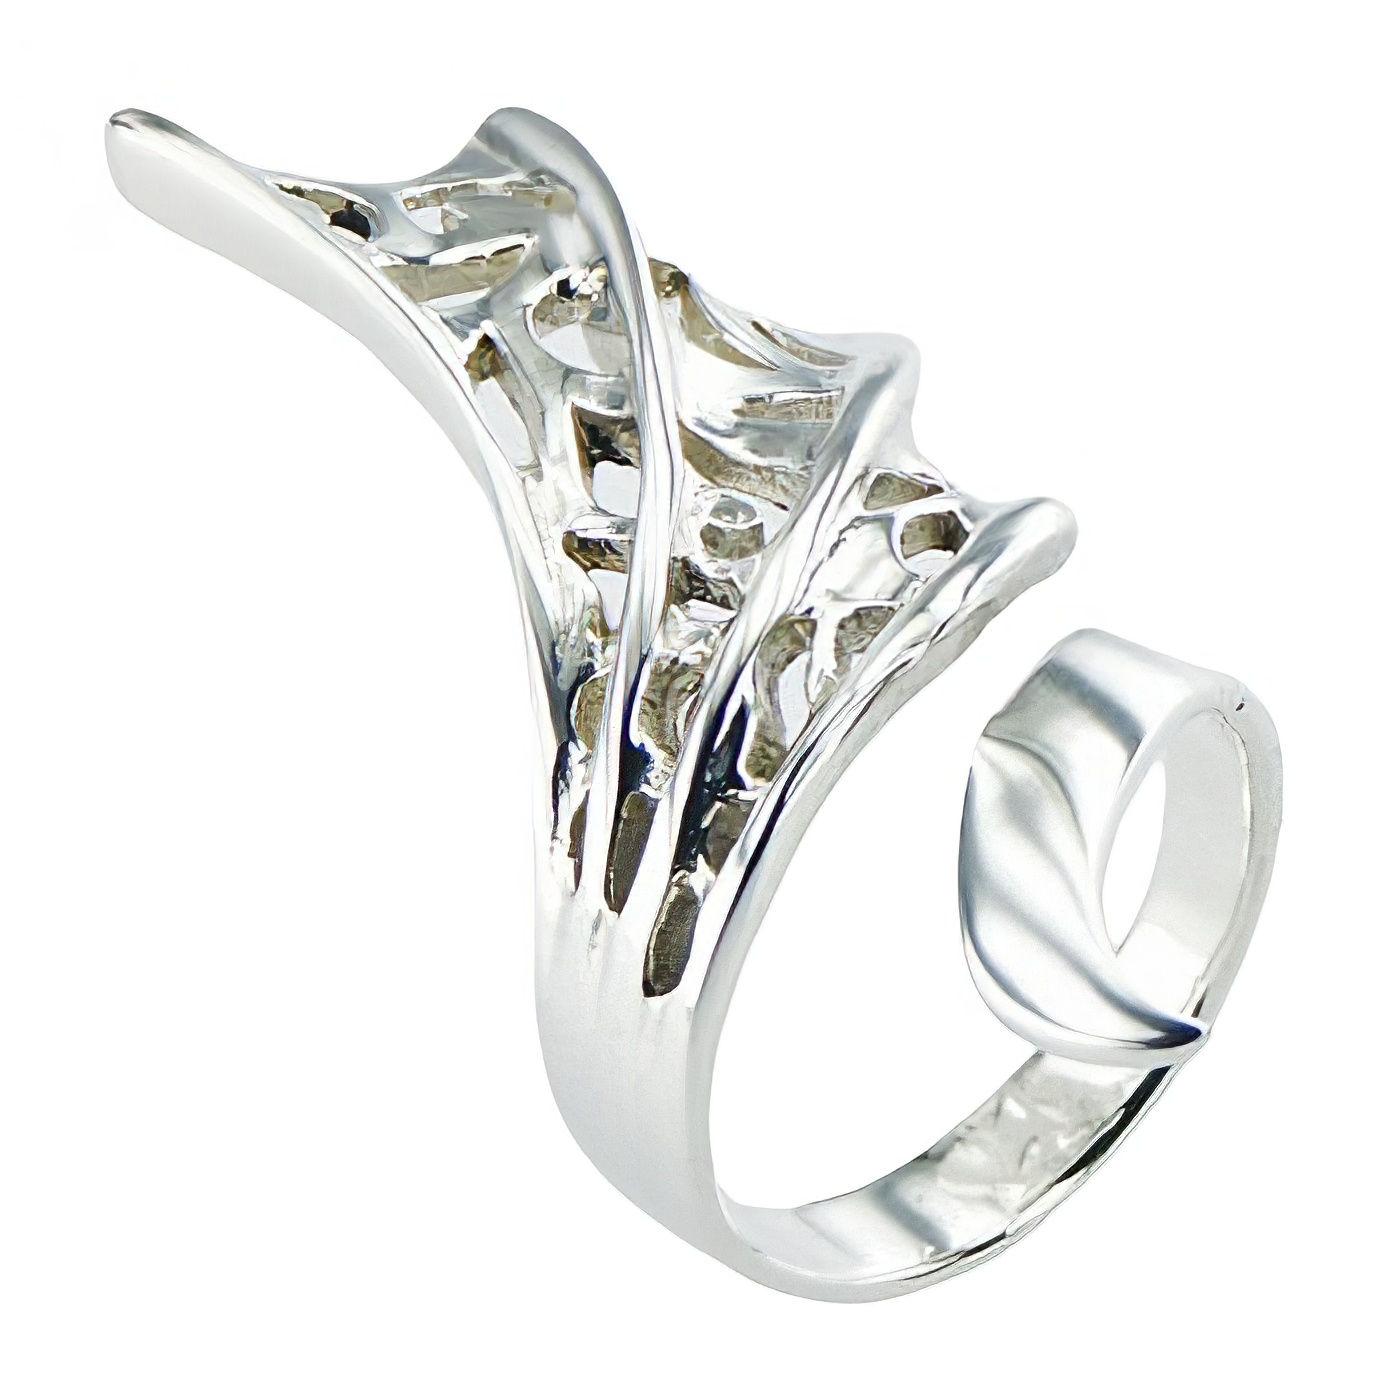 Extravagant Ajoure Silver Spiral Fan Art Nouveau Styled Ring by BeYindi 